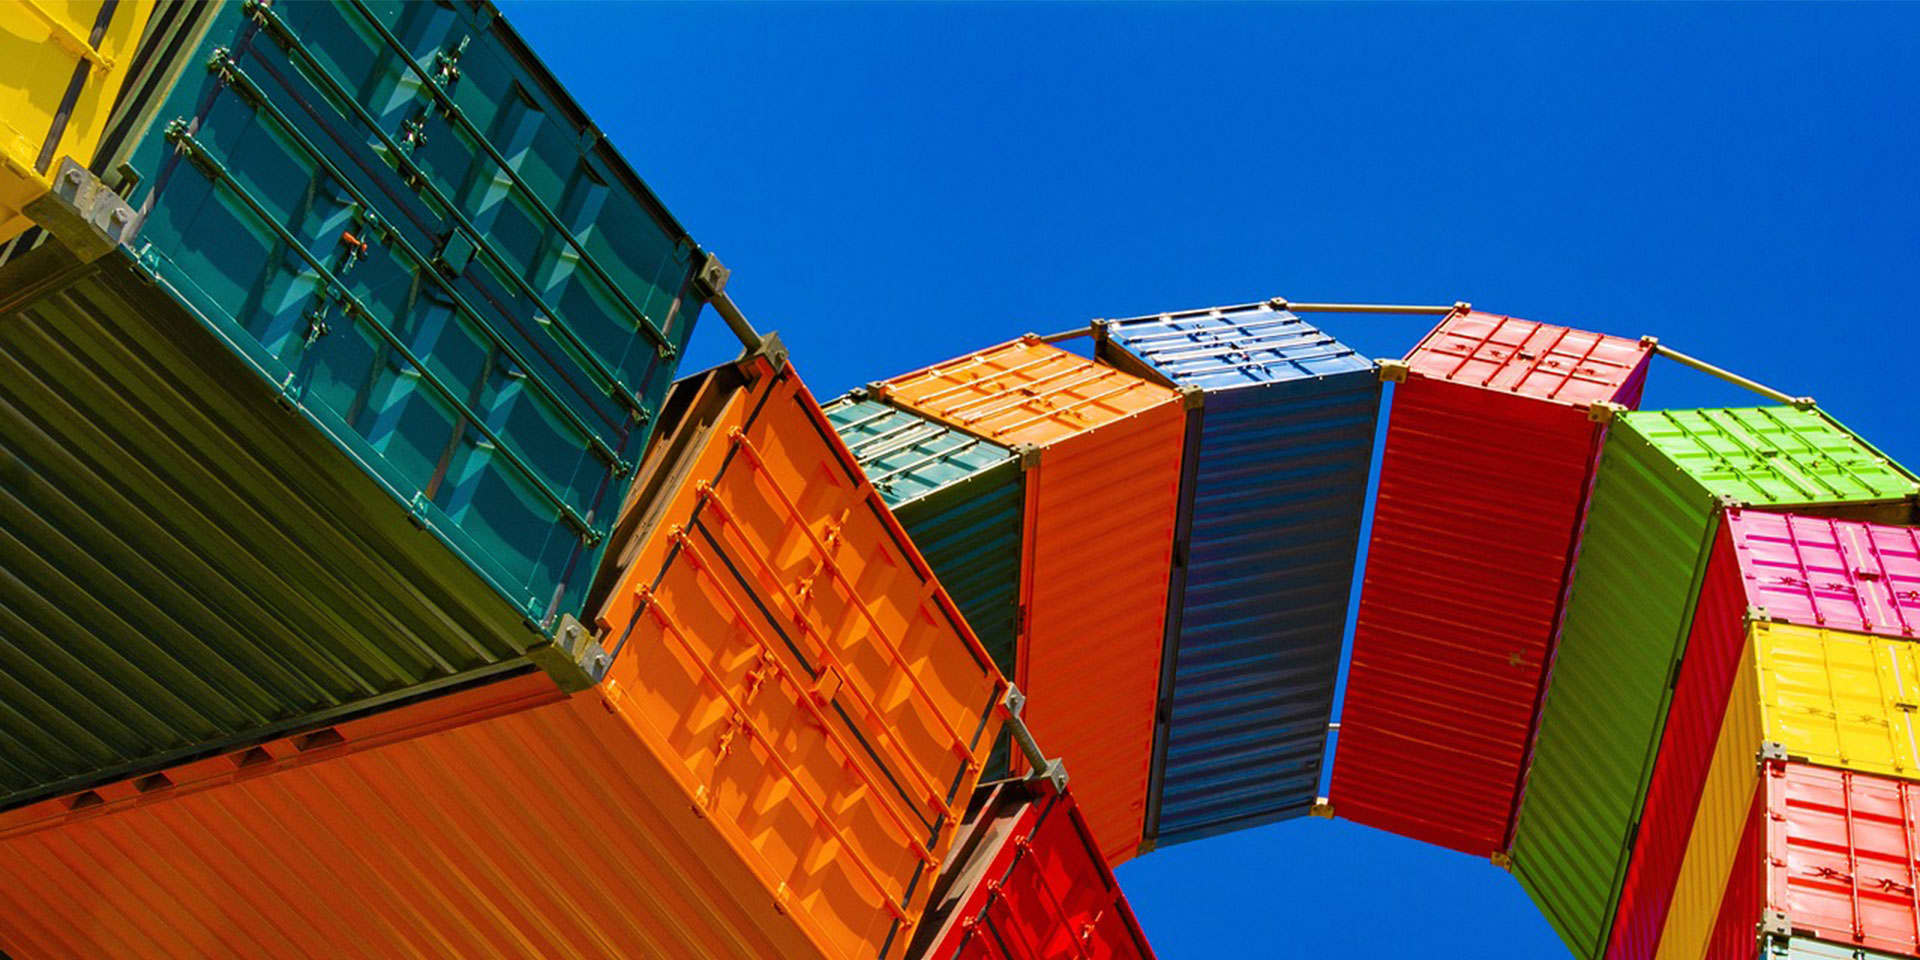 A tower of container ships and a blue sky.